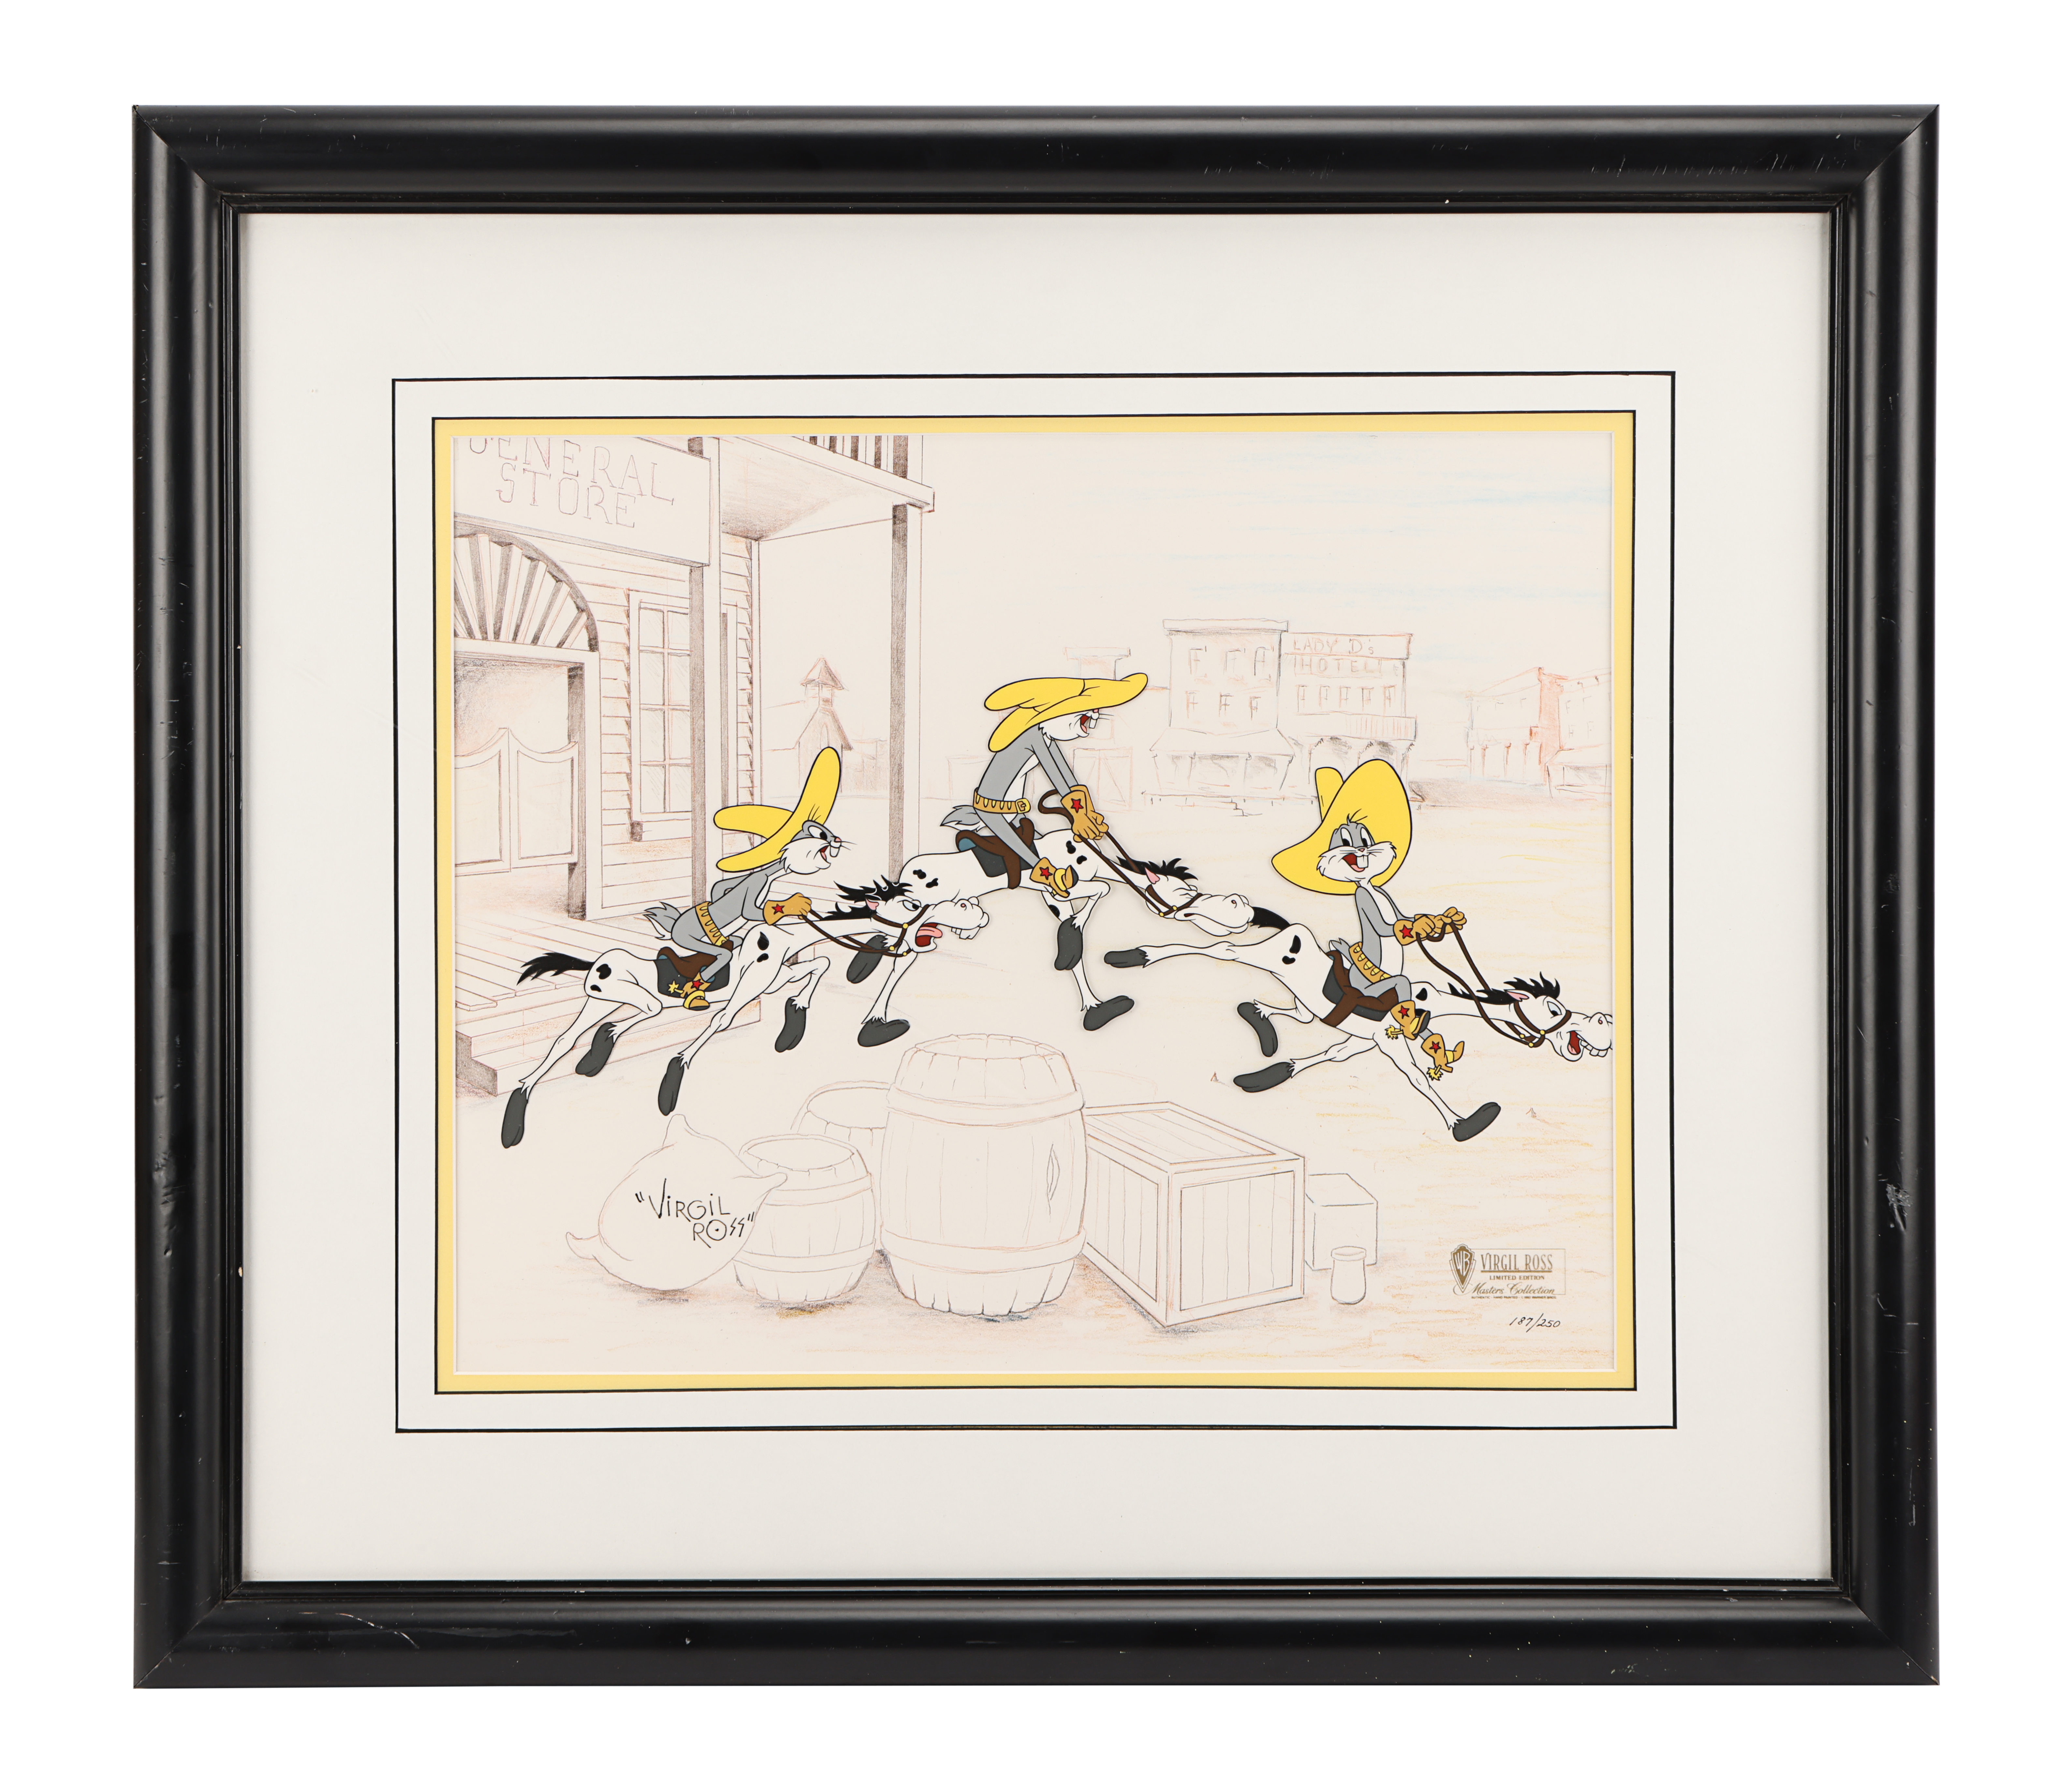 BUGS BUNNY - Signed Limited Edition Animation "Sequential Series" Drawing by Virgil Ross, circa 1990